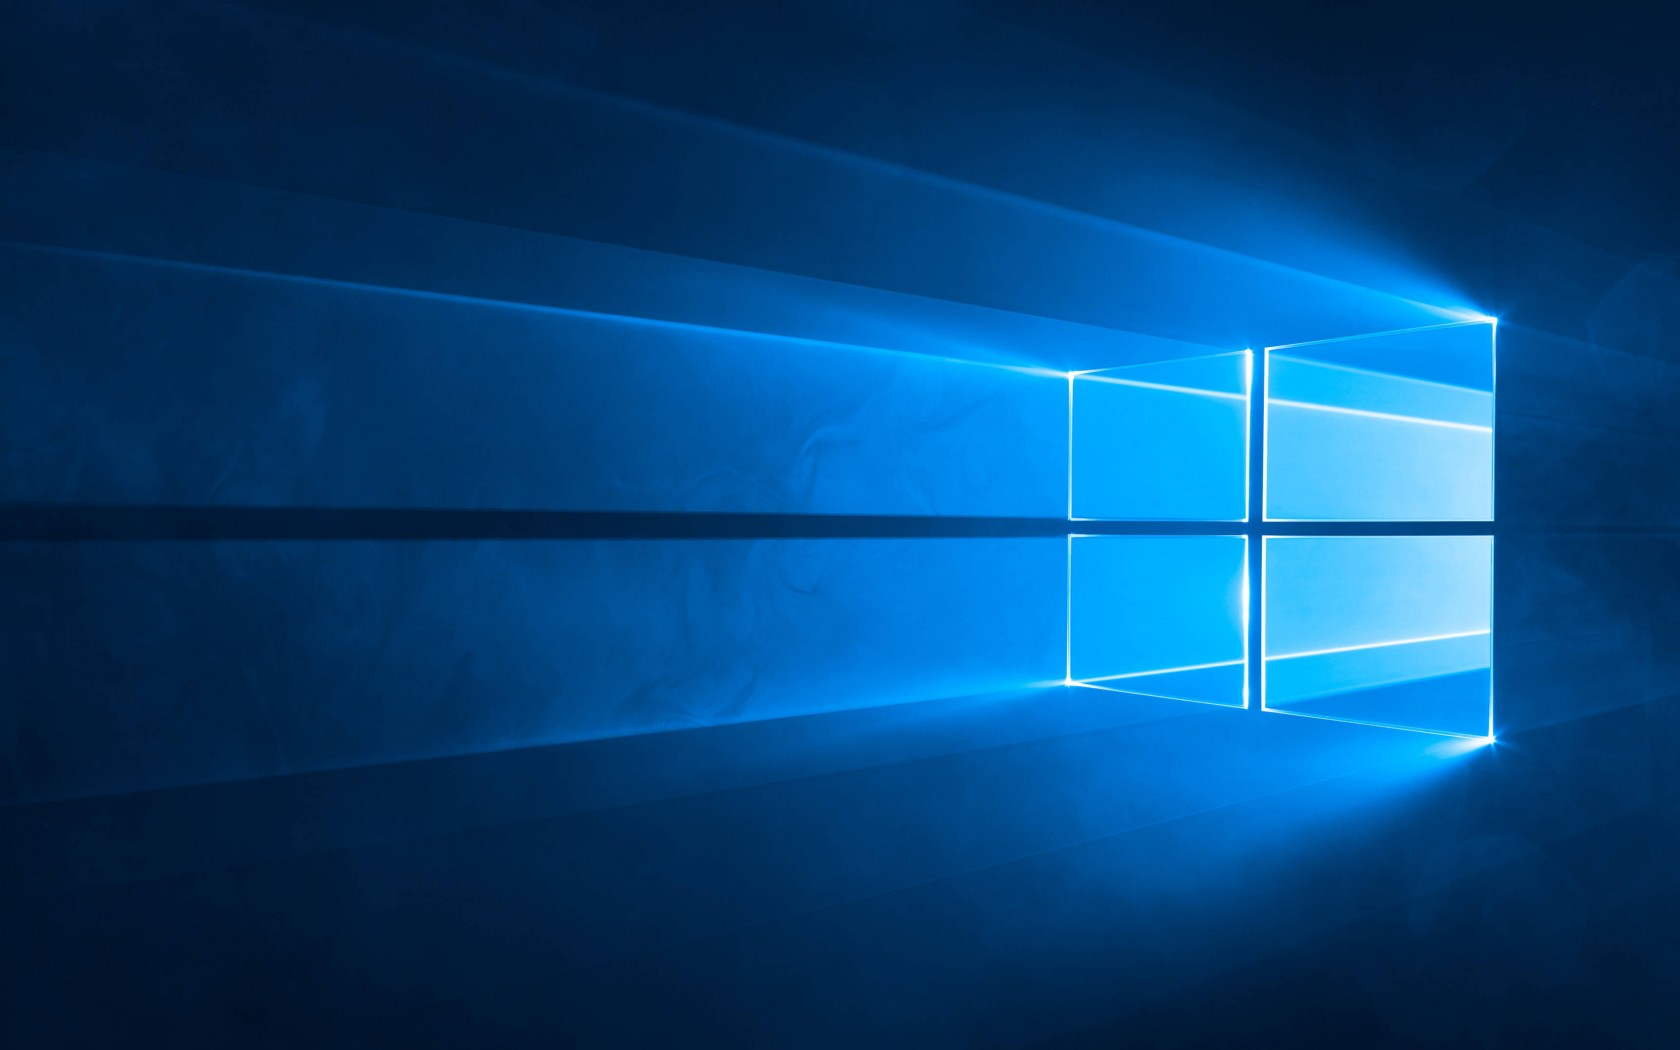 Free Download Windows 10 Official Hd Wallpaper For 1680 X 1050 Hdwallpapersnet 1680x1050 For Your Desktop Mobile Tablet Explore 50 1680 X 1050 Wallpaper 1680 X 1050 Hd Wallpaper Wallpaper For Windows 10 1680x1050 1680 X 1050 Christmas Wallpaper